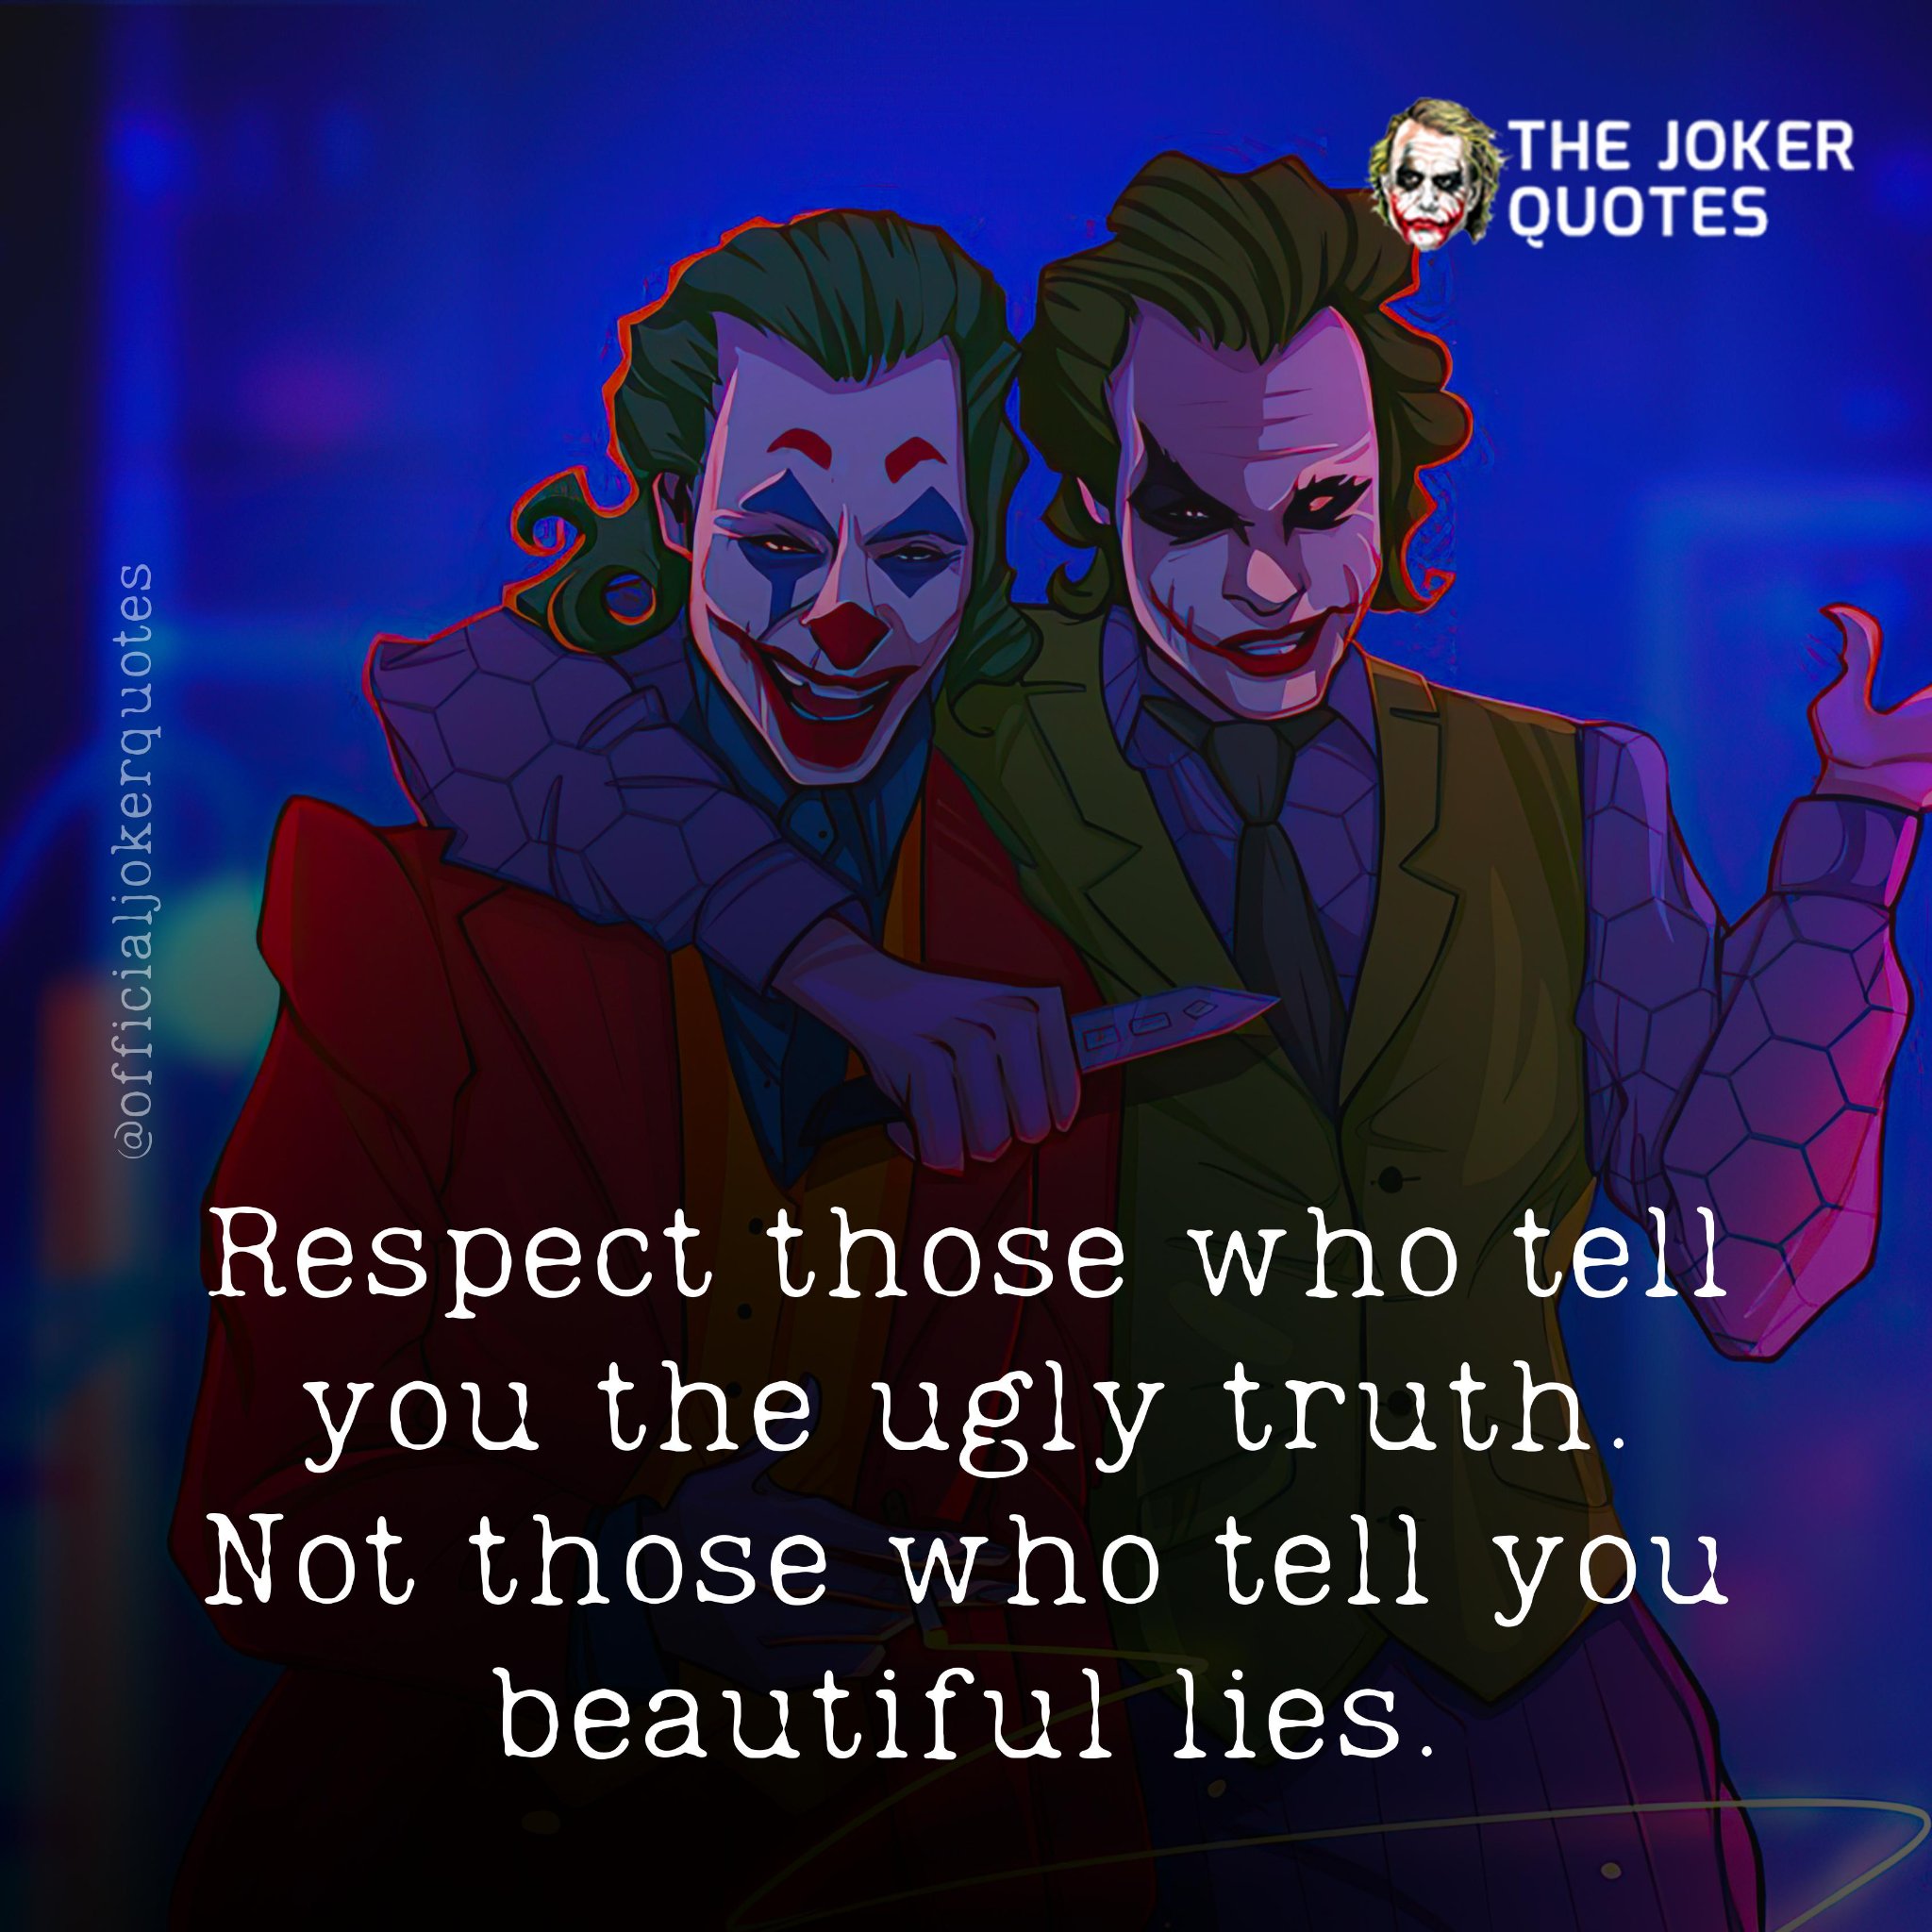 Respect those who tell you the ugly truth, not those who tell you beautiful lies.